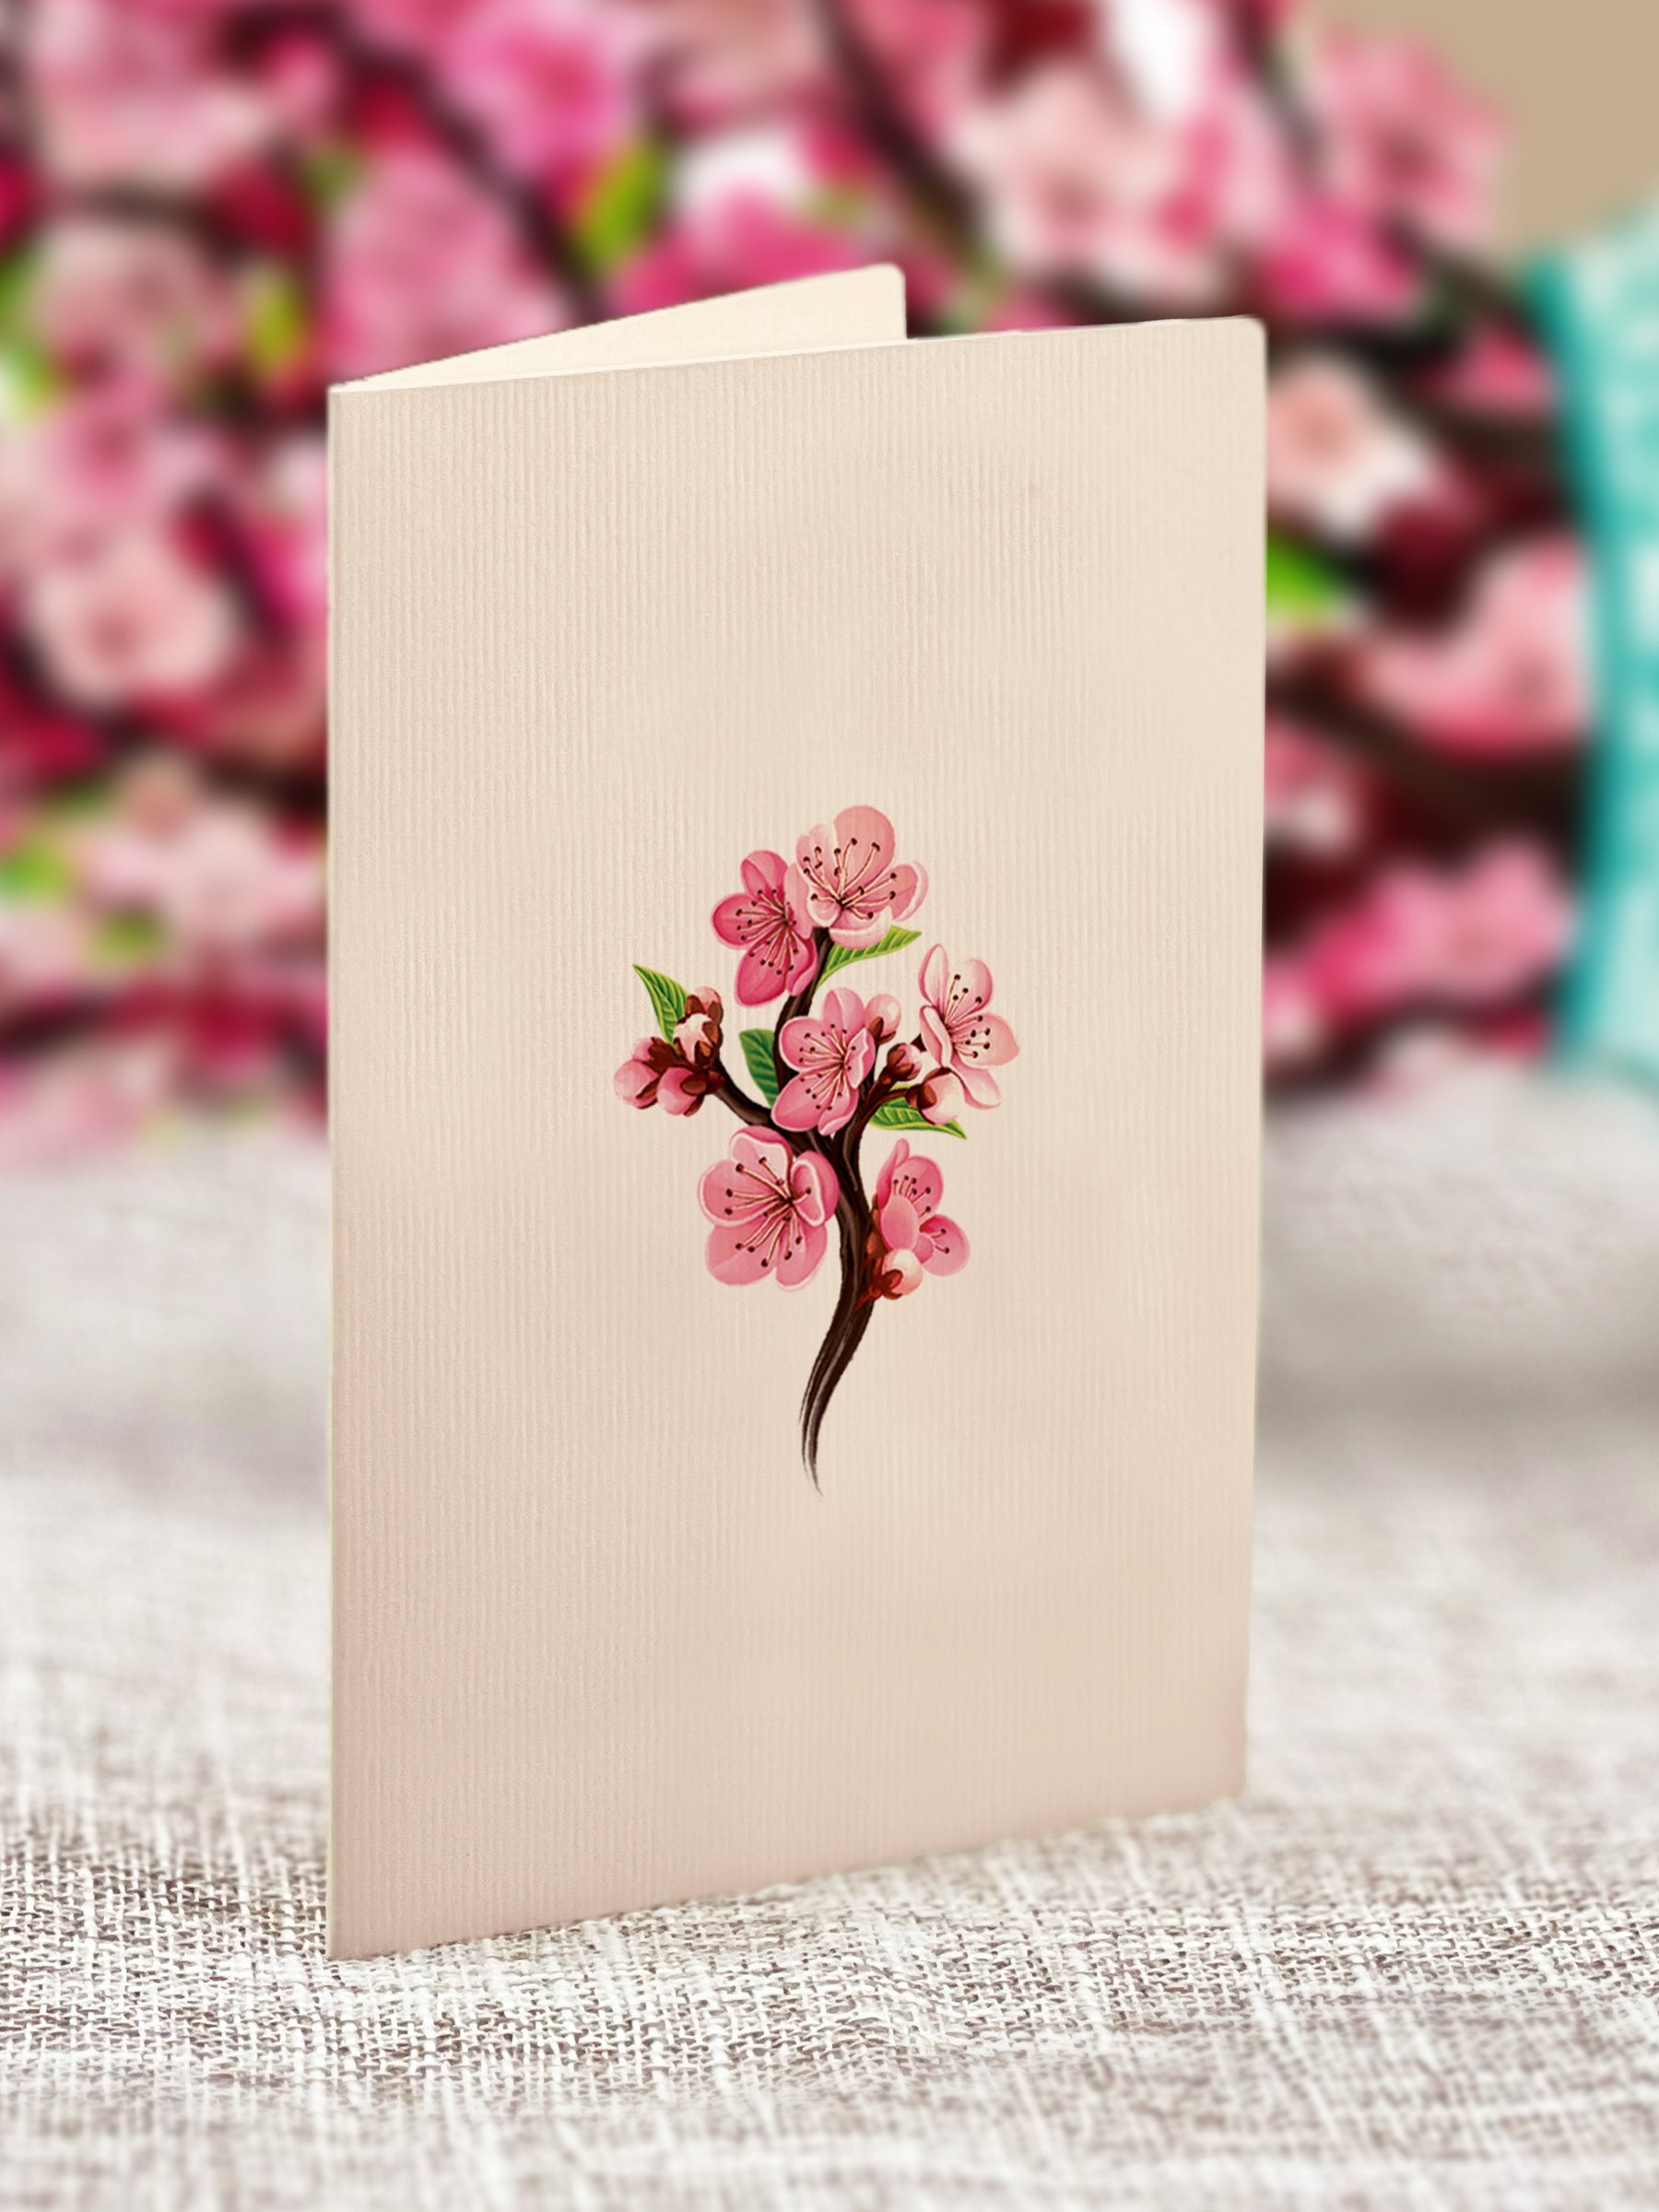 Fresh Cut Paper 3D Pop Up Flower Greeting Note Card – Cherry Blossoms – 6" x 5"